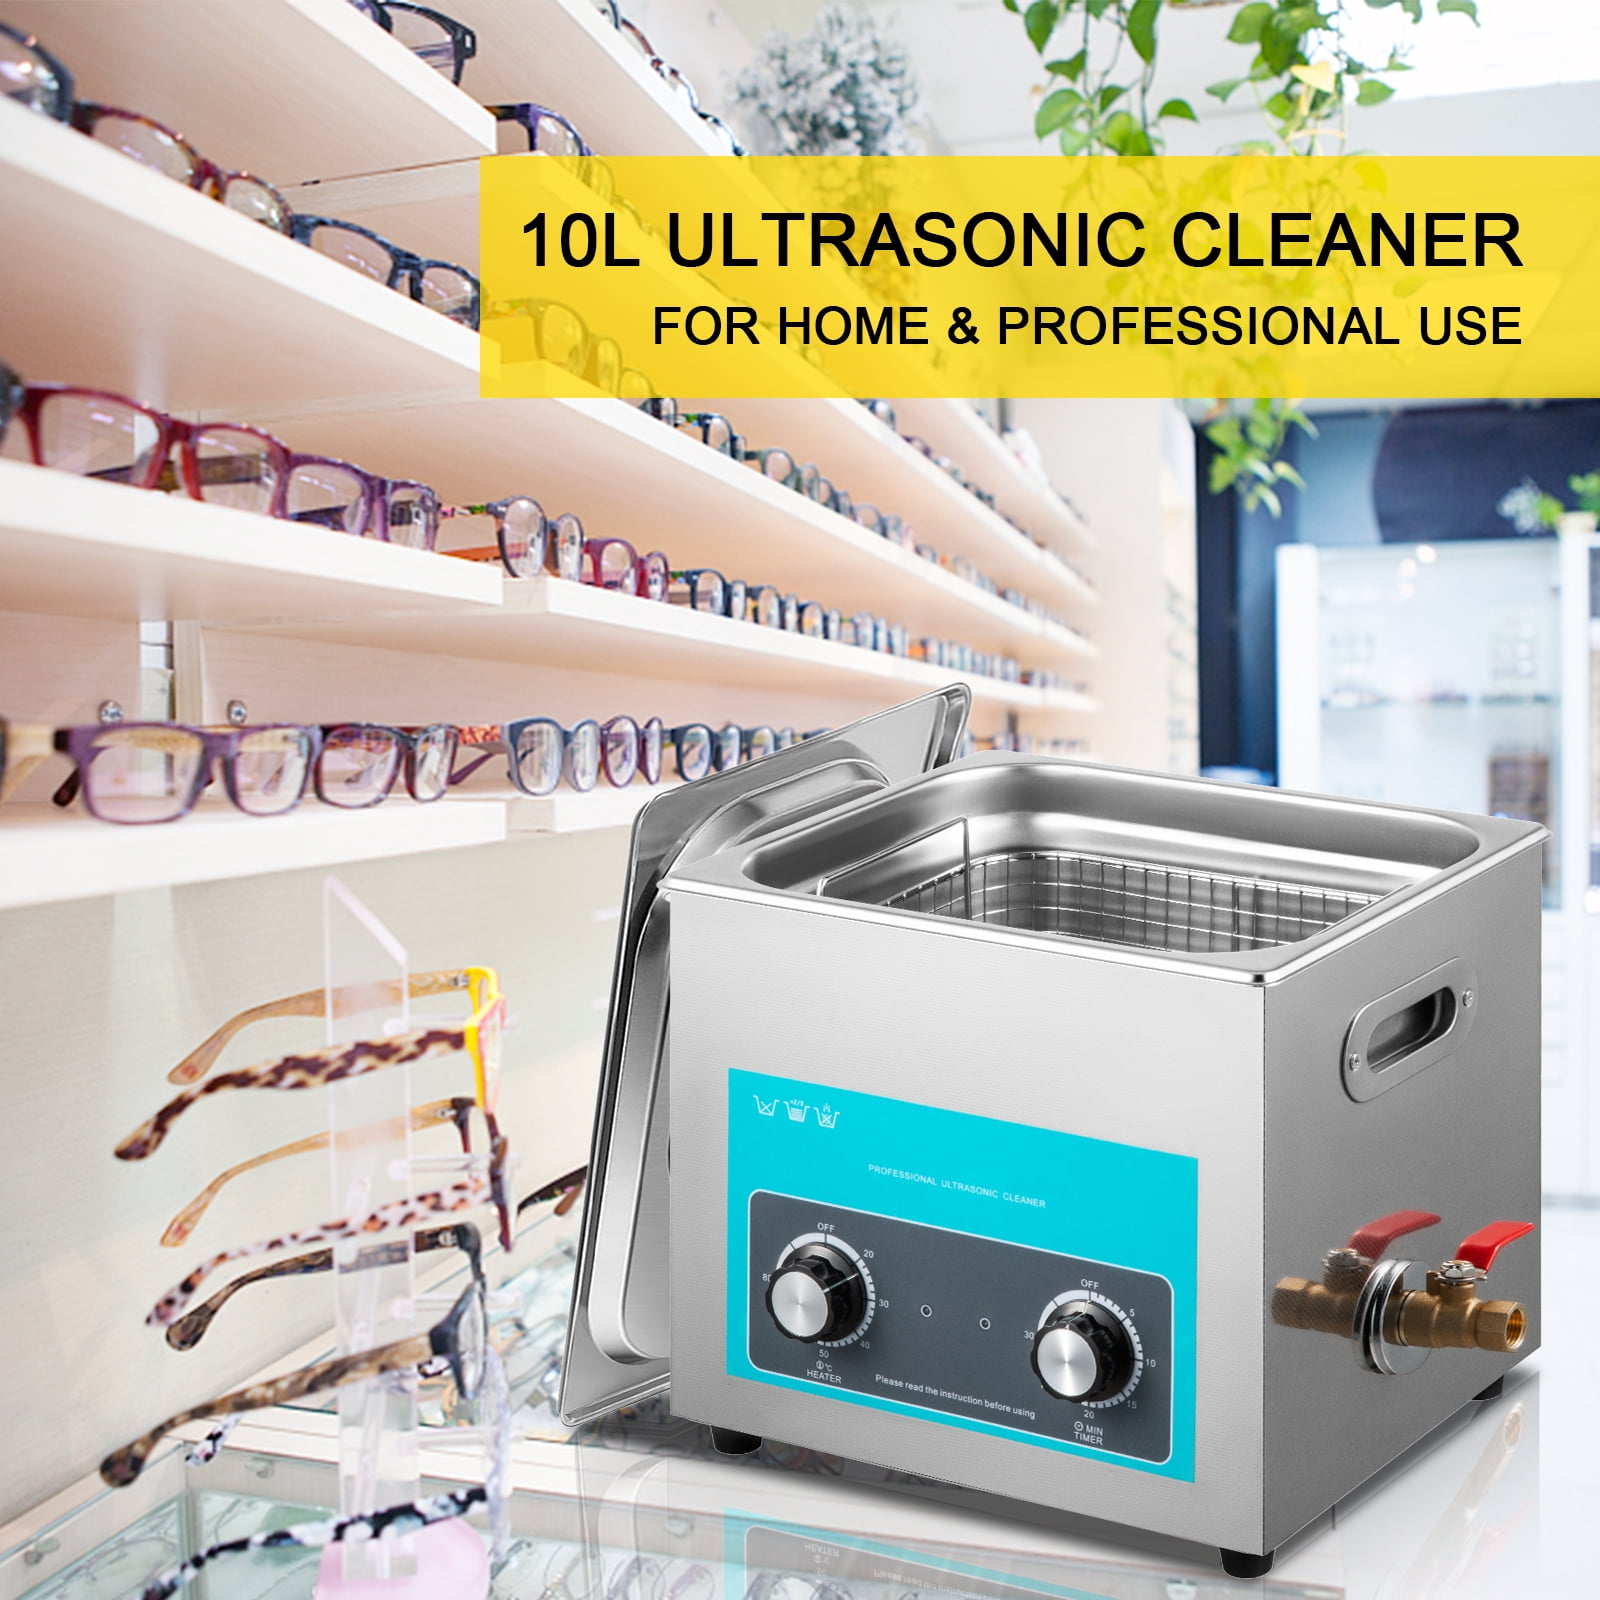 600ml Smart Ultrasonic Cleaner For Jewelry Glasses Circuit Board Cleaning  Machine Intelligent Control Ultrasonic Cleaner Bath From Airmen, $36.07